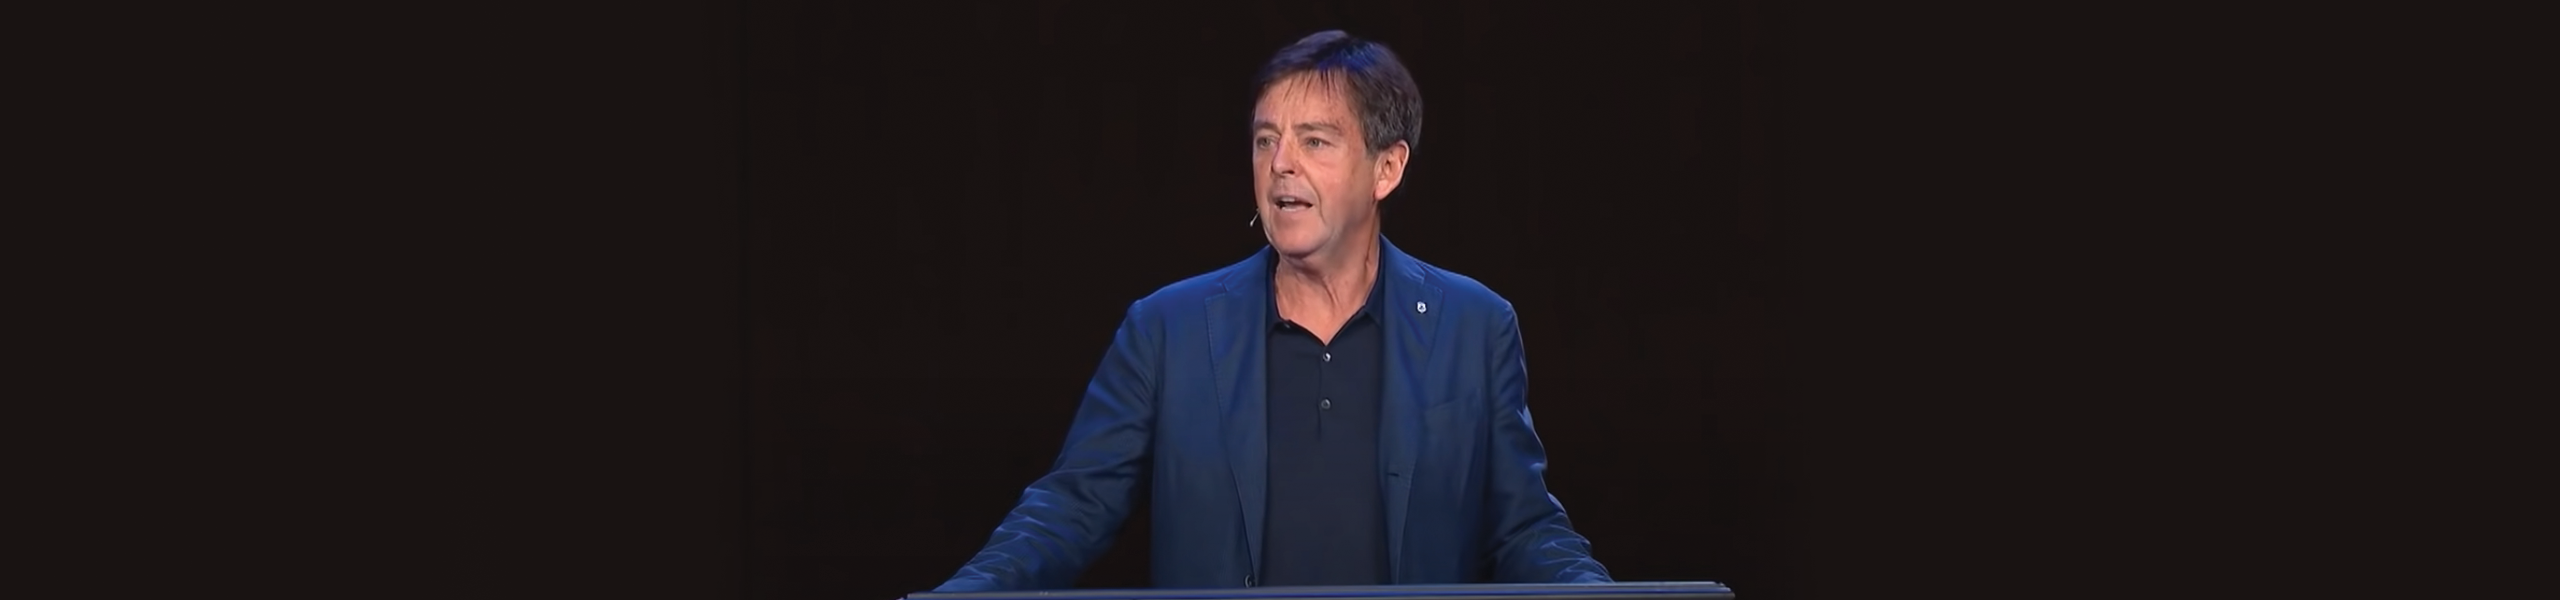 Basics 2016: A Conference for Pastors | Alistair Begg